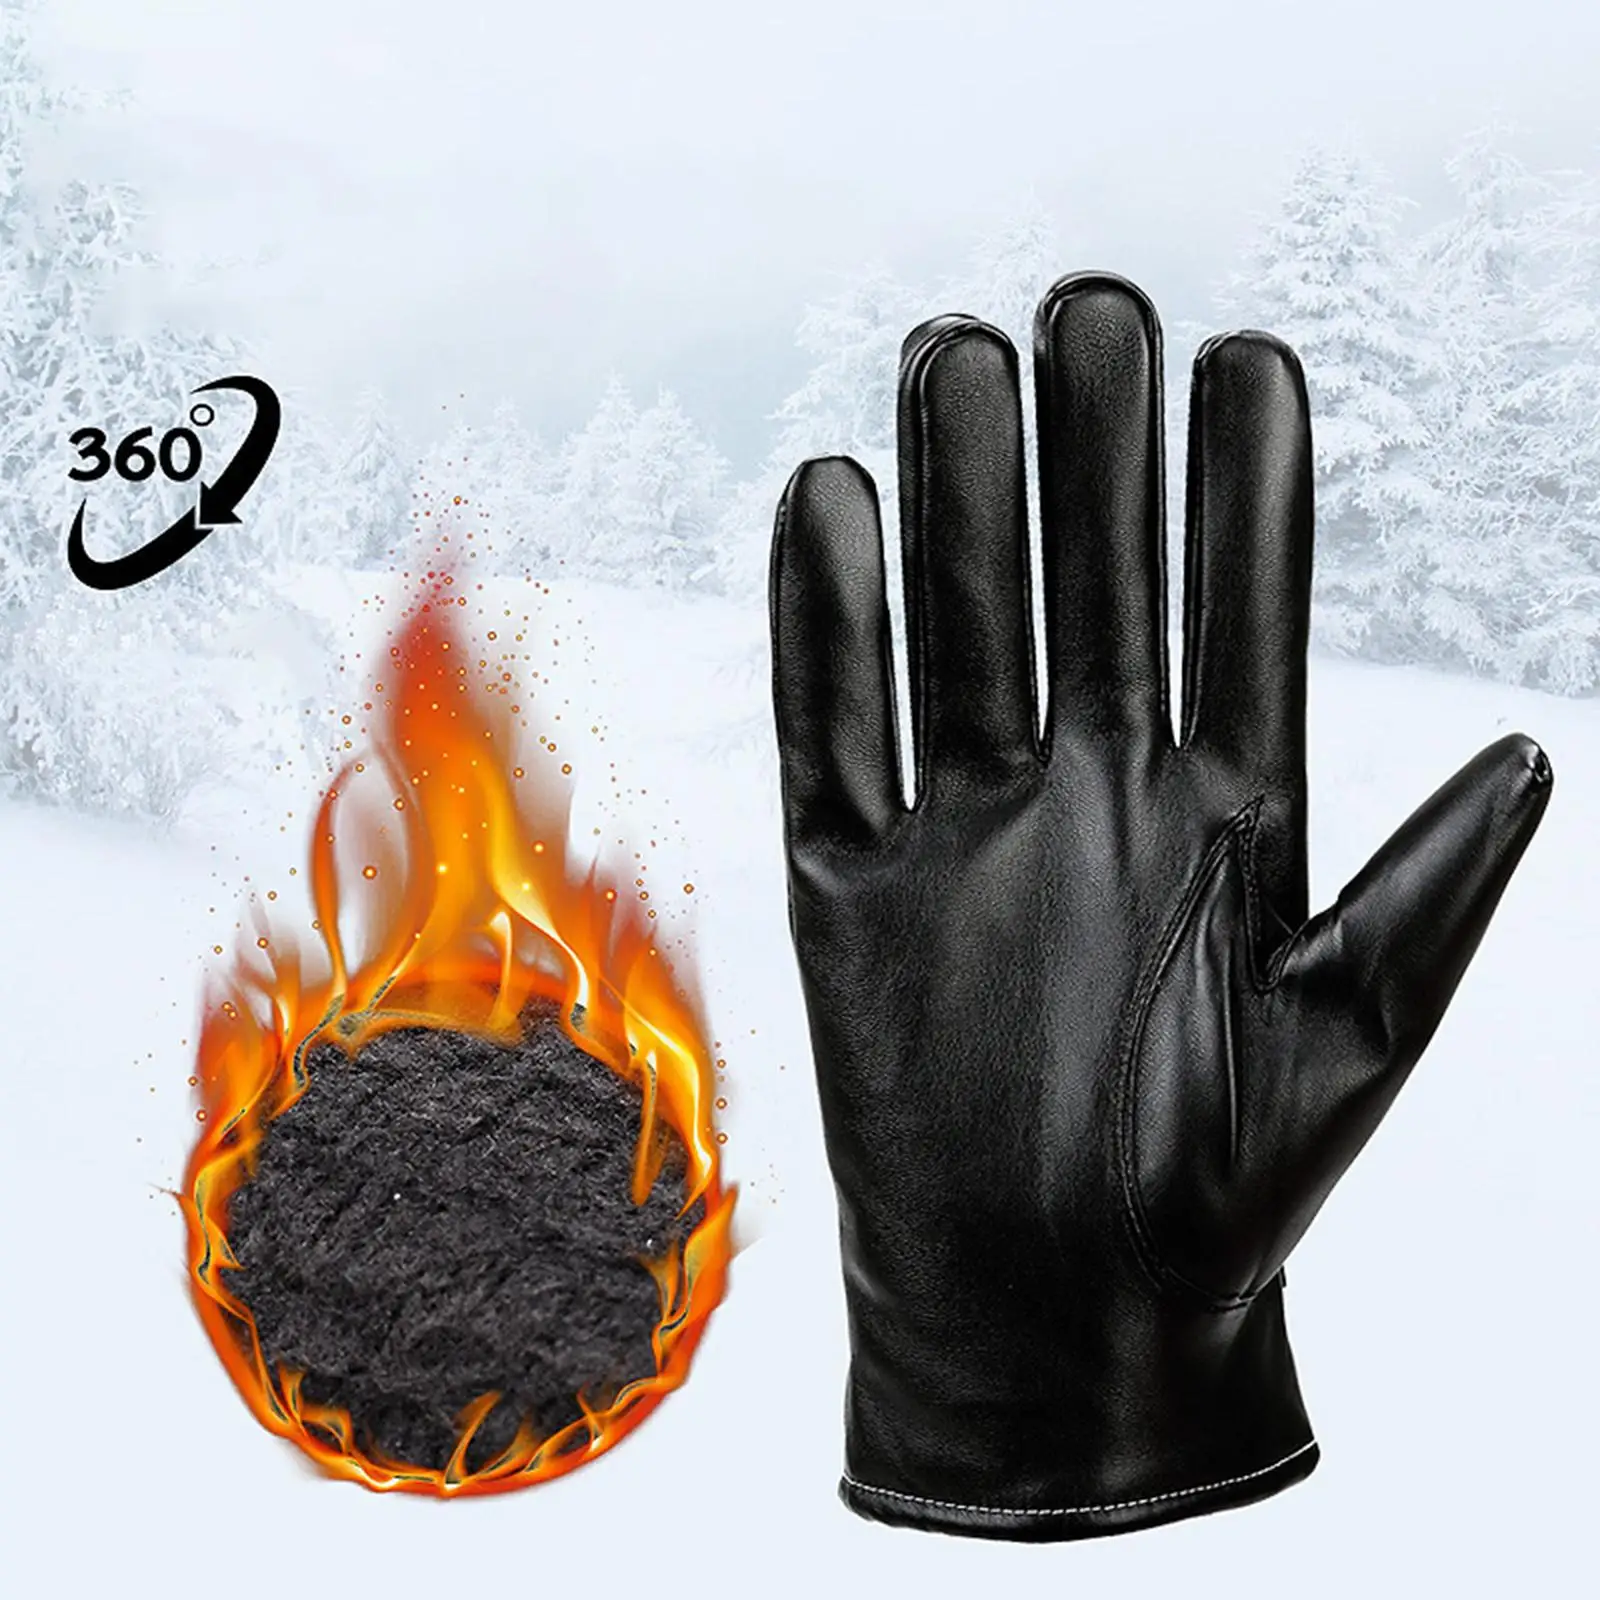 Water Resistance Windproof Winter Gloves Artificial Leather Mittens for Men Cold Weather Snowboarding Snowmobile Running Fishing